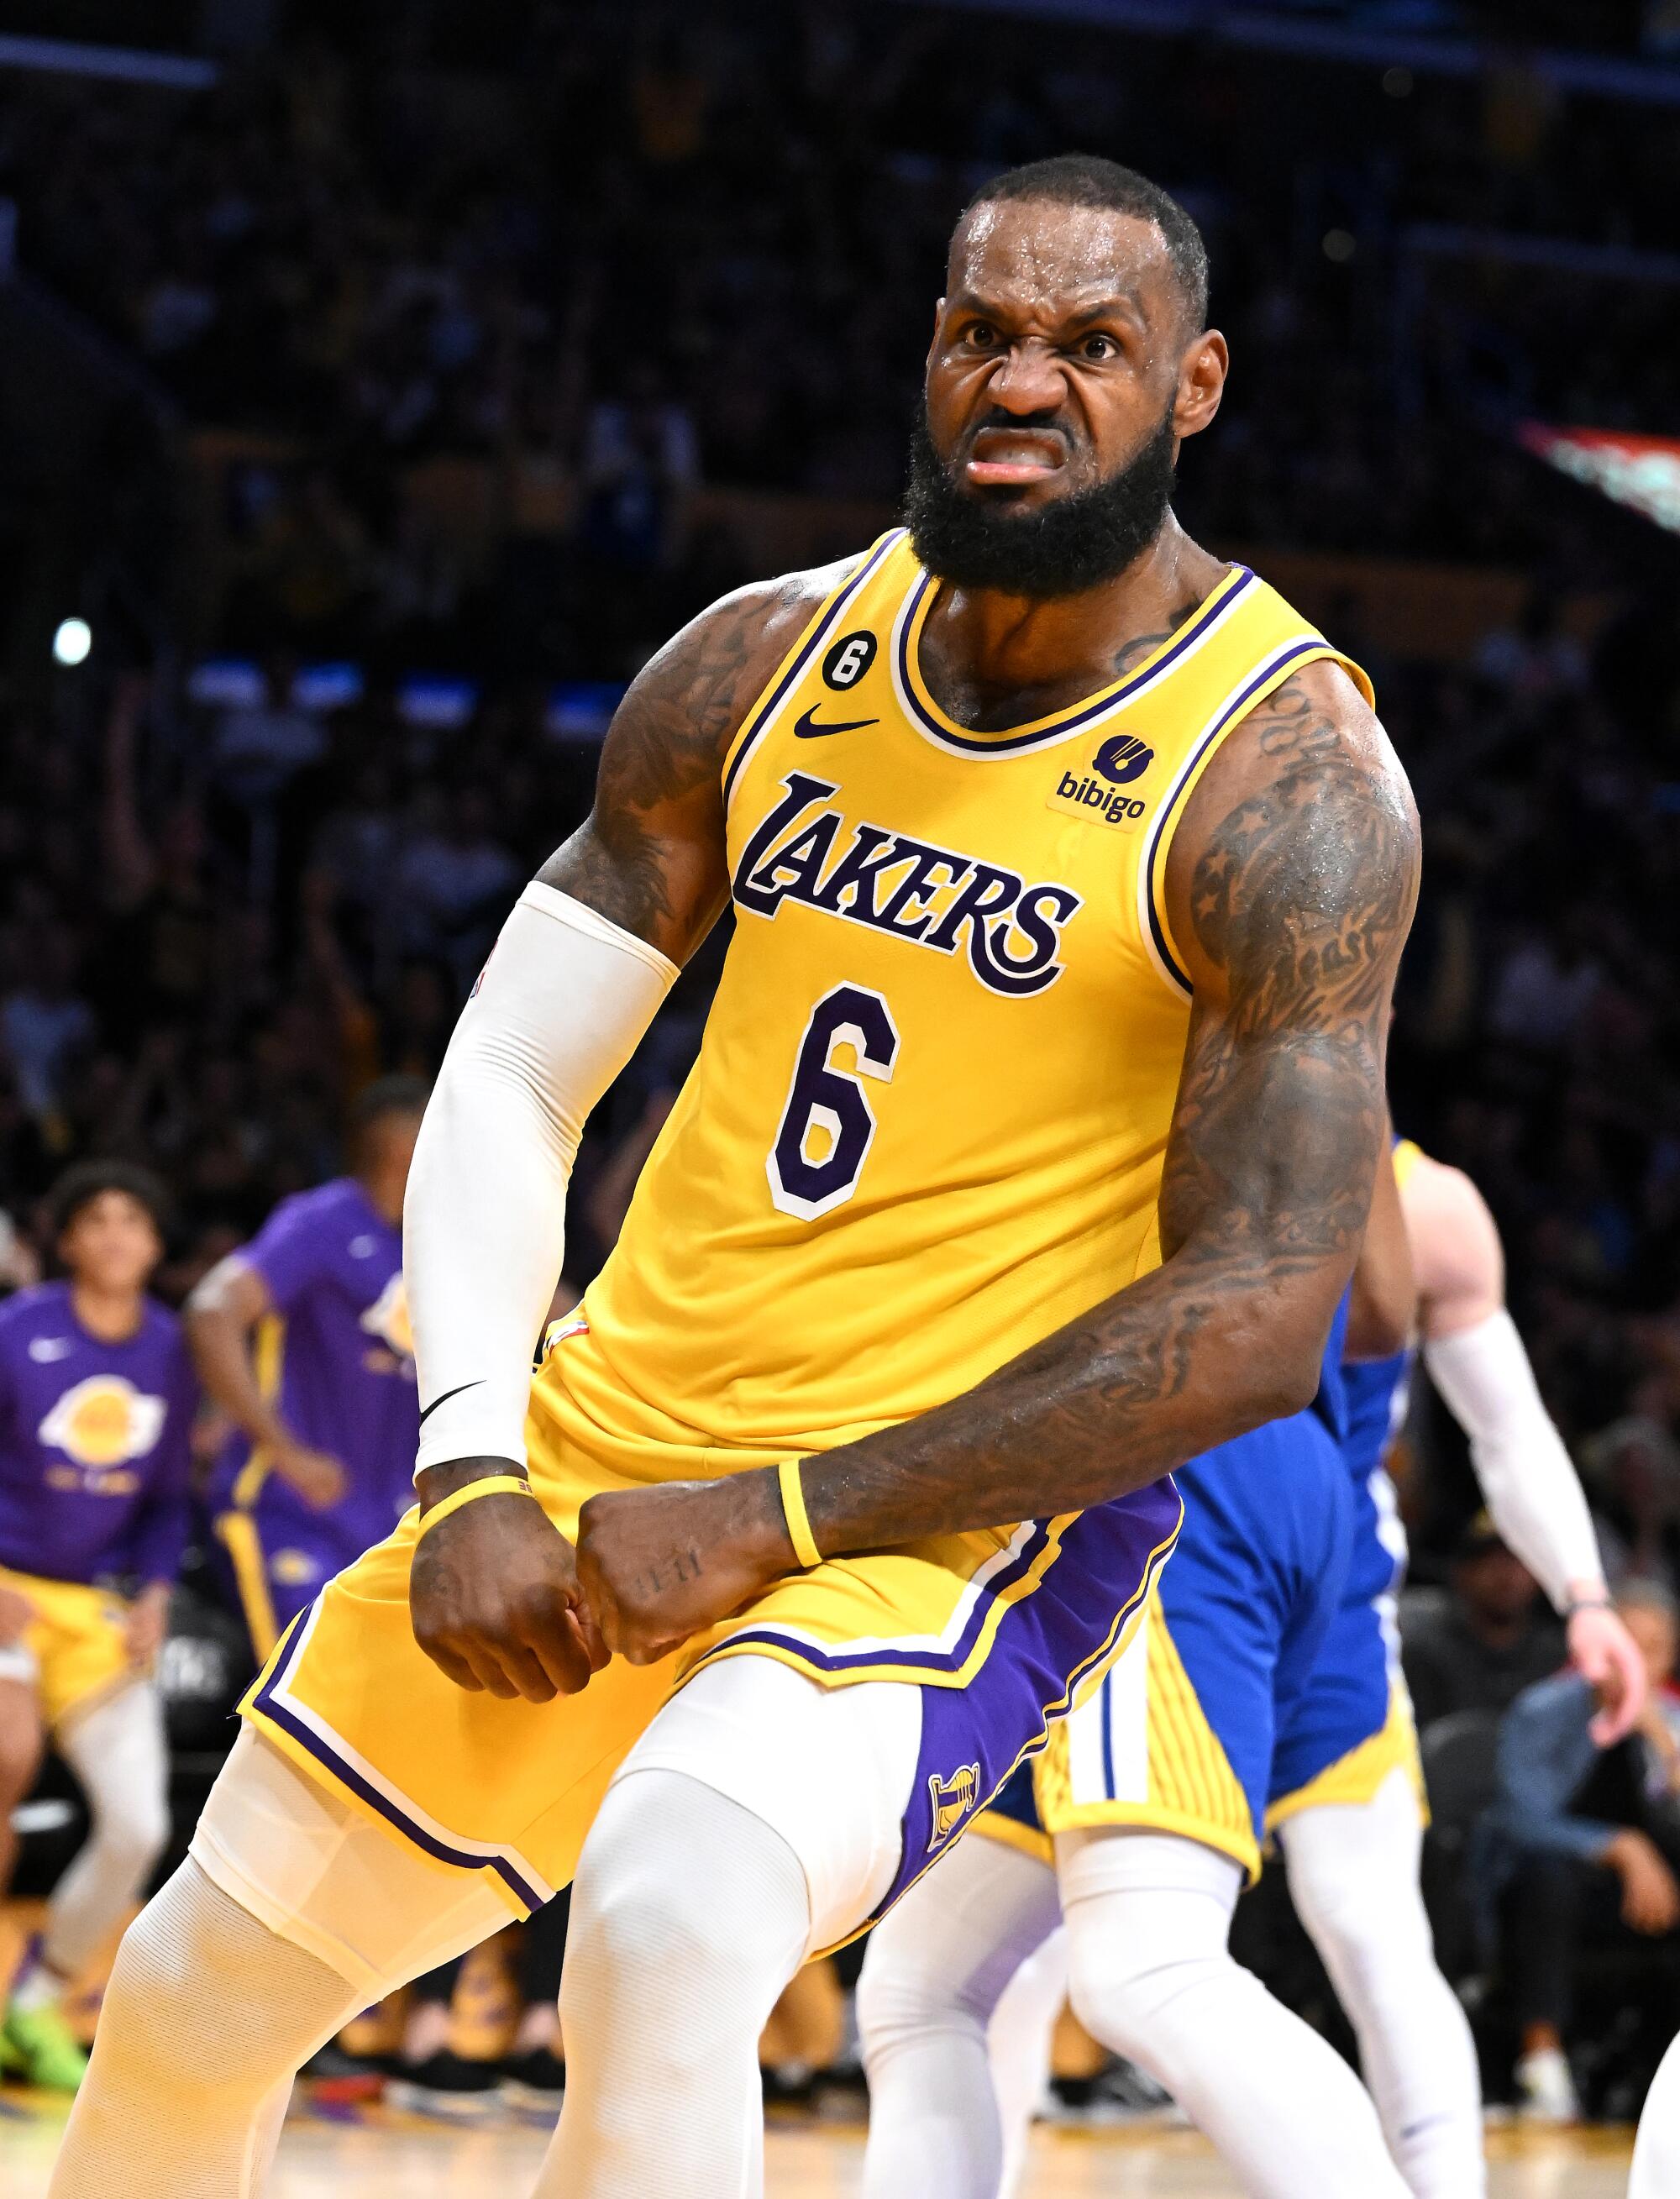 Lakers star LeBron James celebrates after scoring against the Warriors in the third quarter of Game 6.